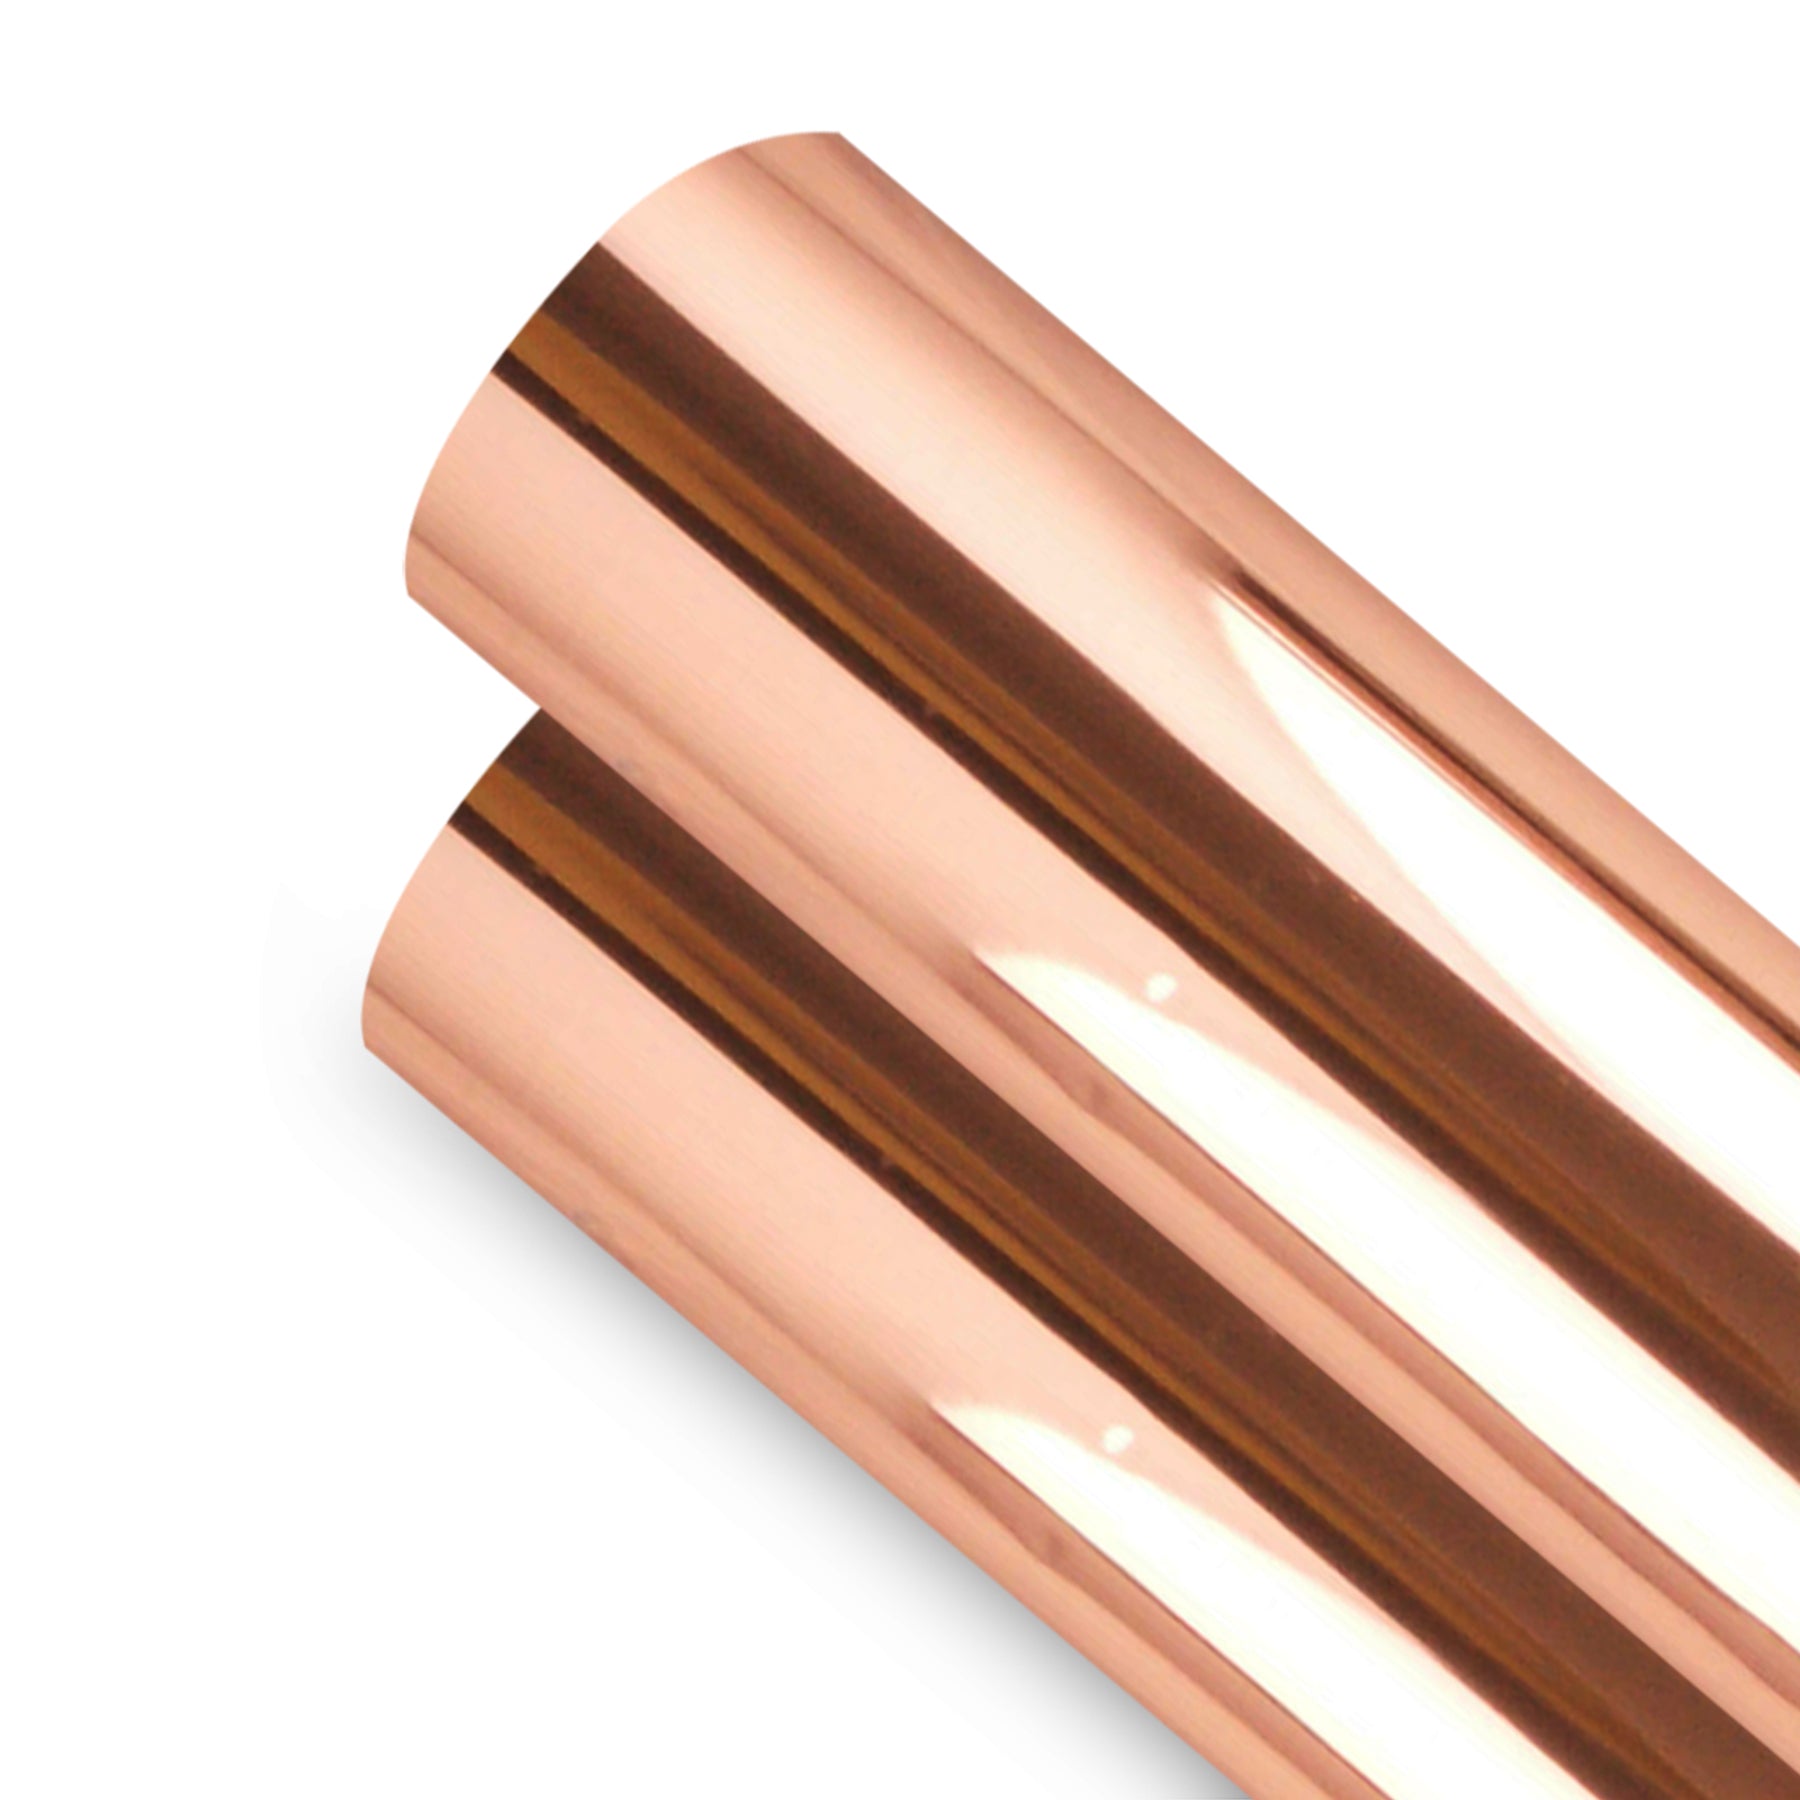 Rose Gold Toner Foil is a metallic foil that has been coated with rose gold ink or toner. Rose gold is a metallic colour made by blending gold, copper, and a hint of silver. It's a warm, rosy hue that's frequently associated with wealth and elegance.